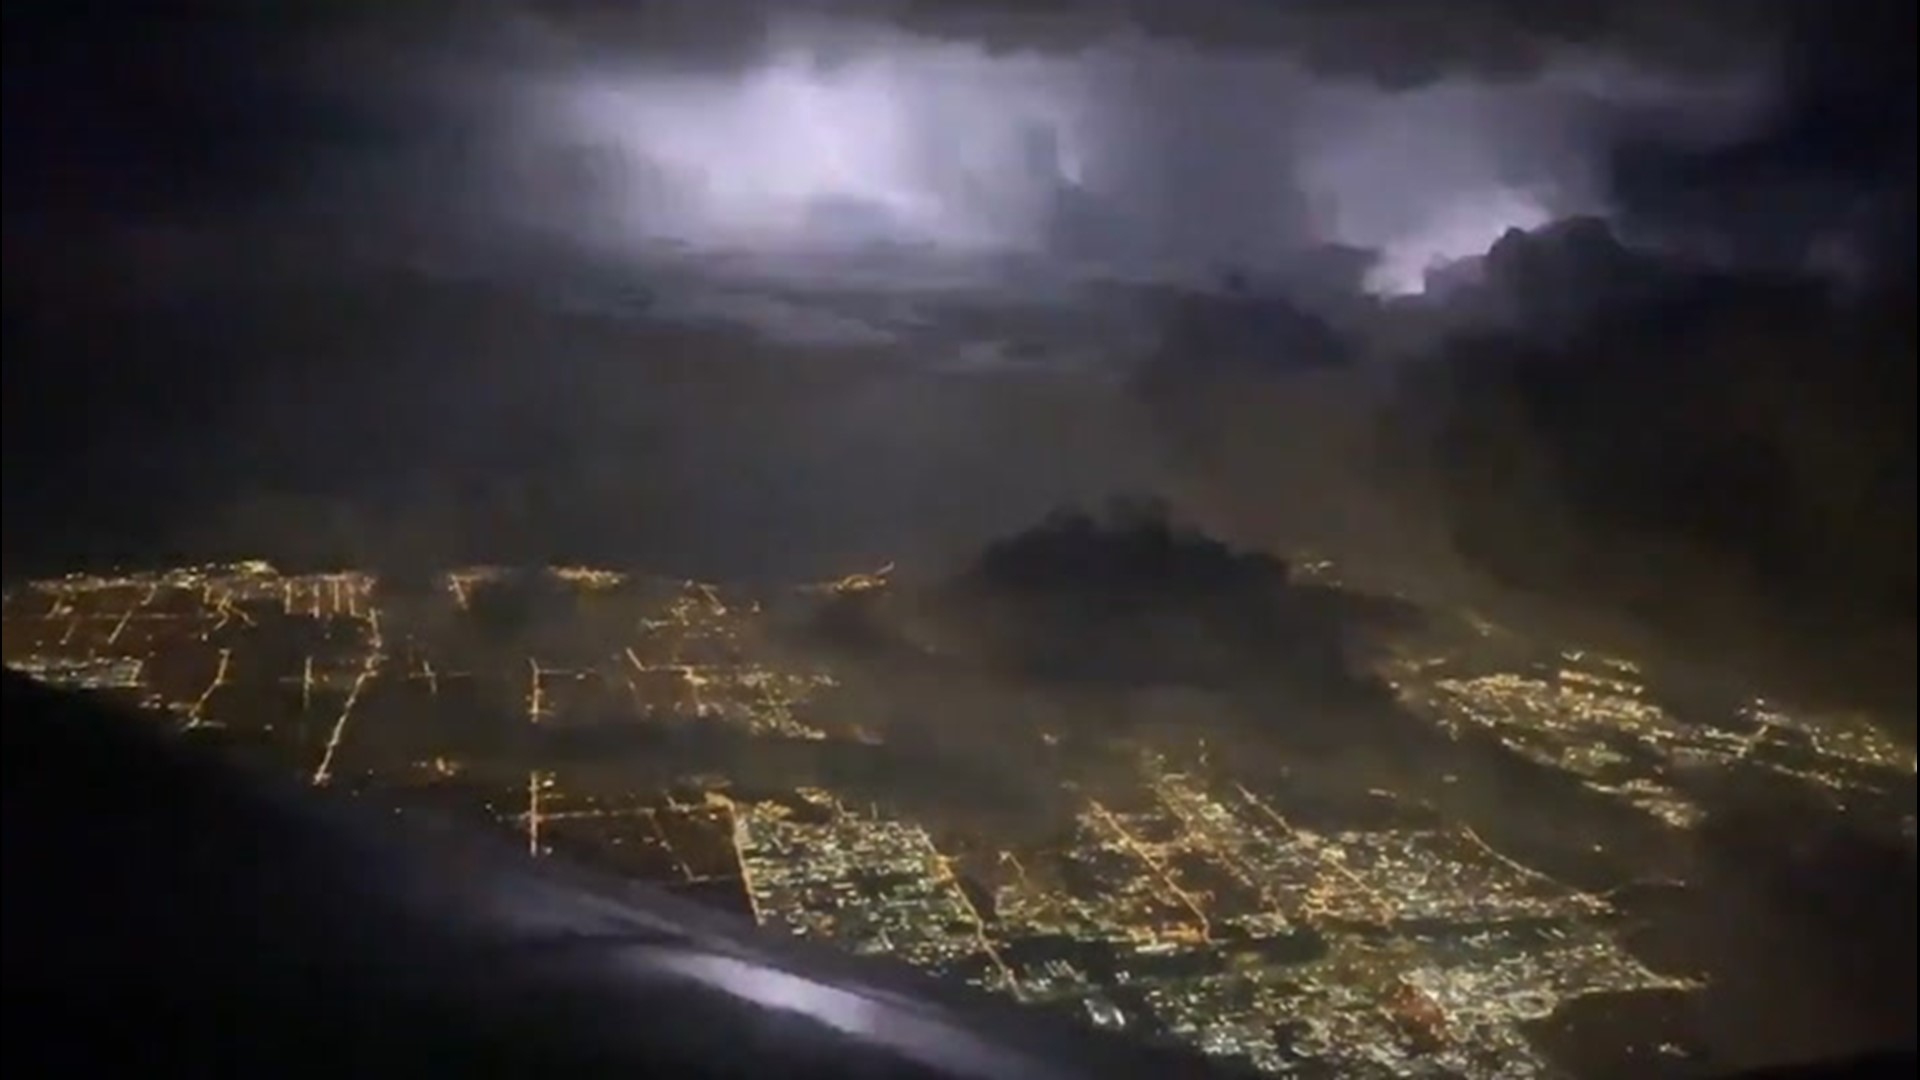 Residents of Toronto, Ontario, were treated to an electrifying lightning storm that illuminated the night sky on June 2.